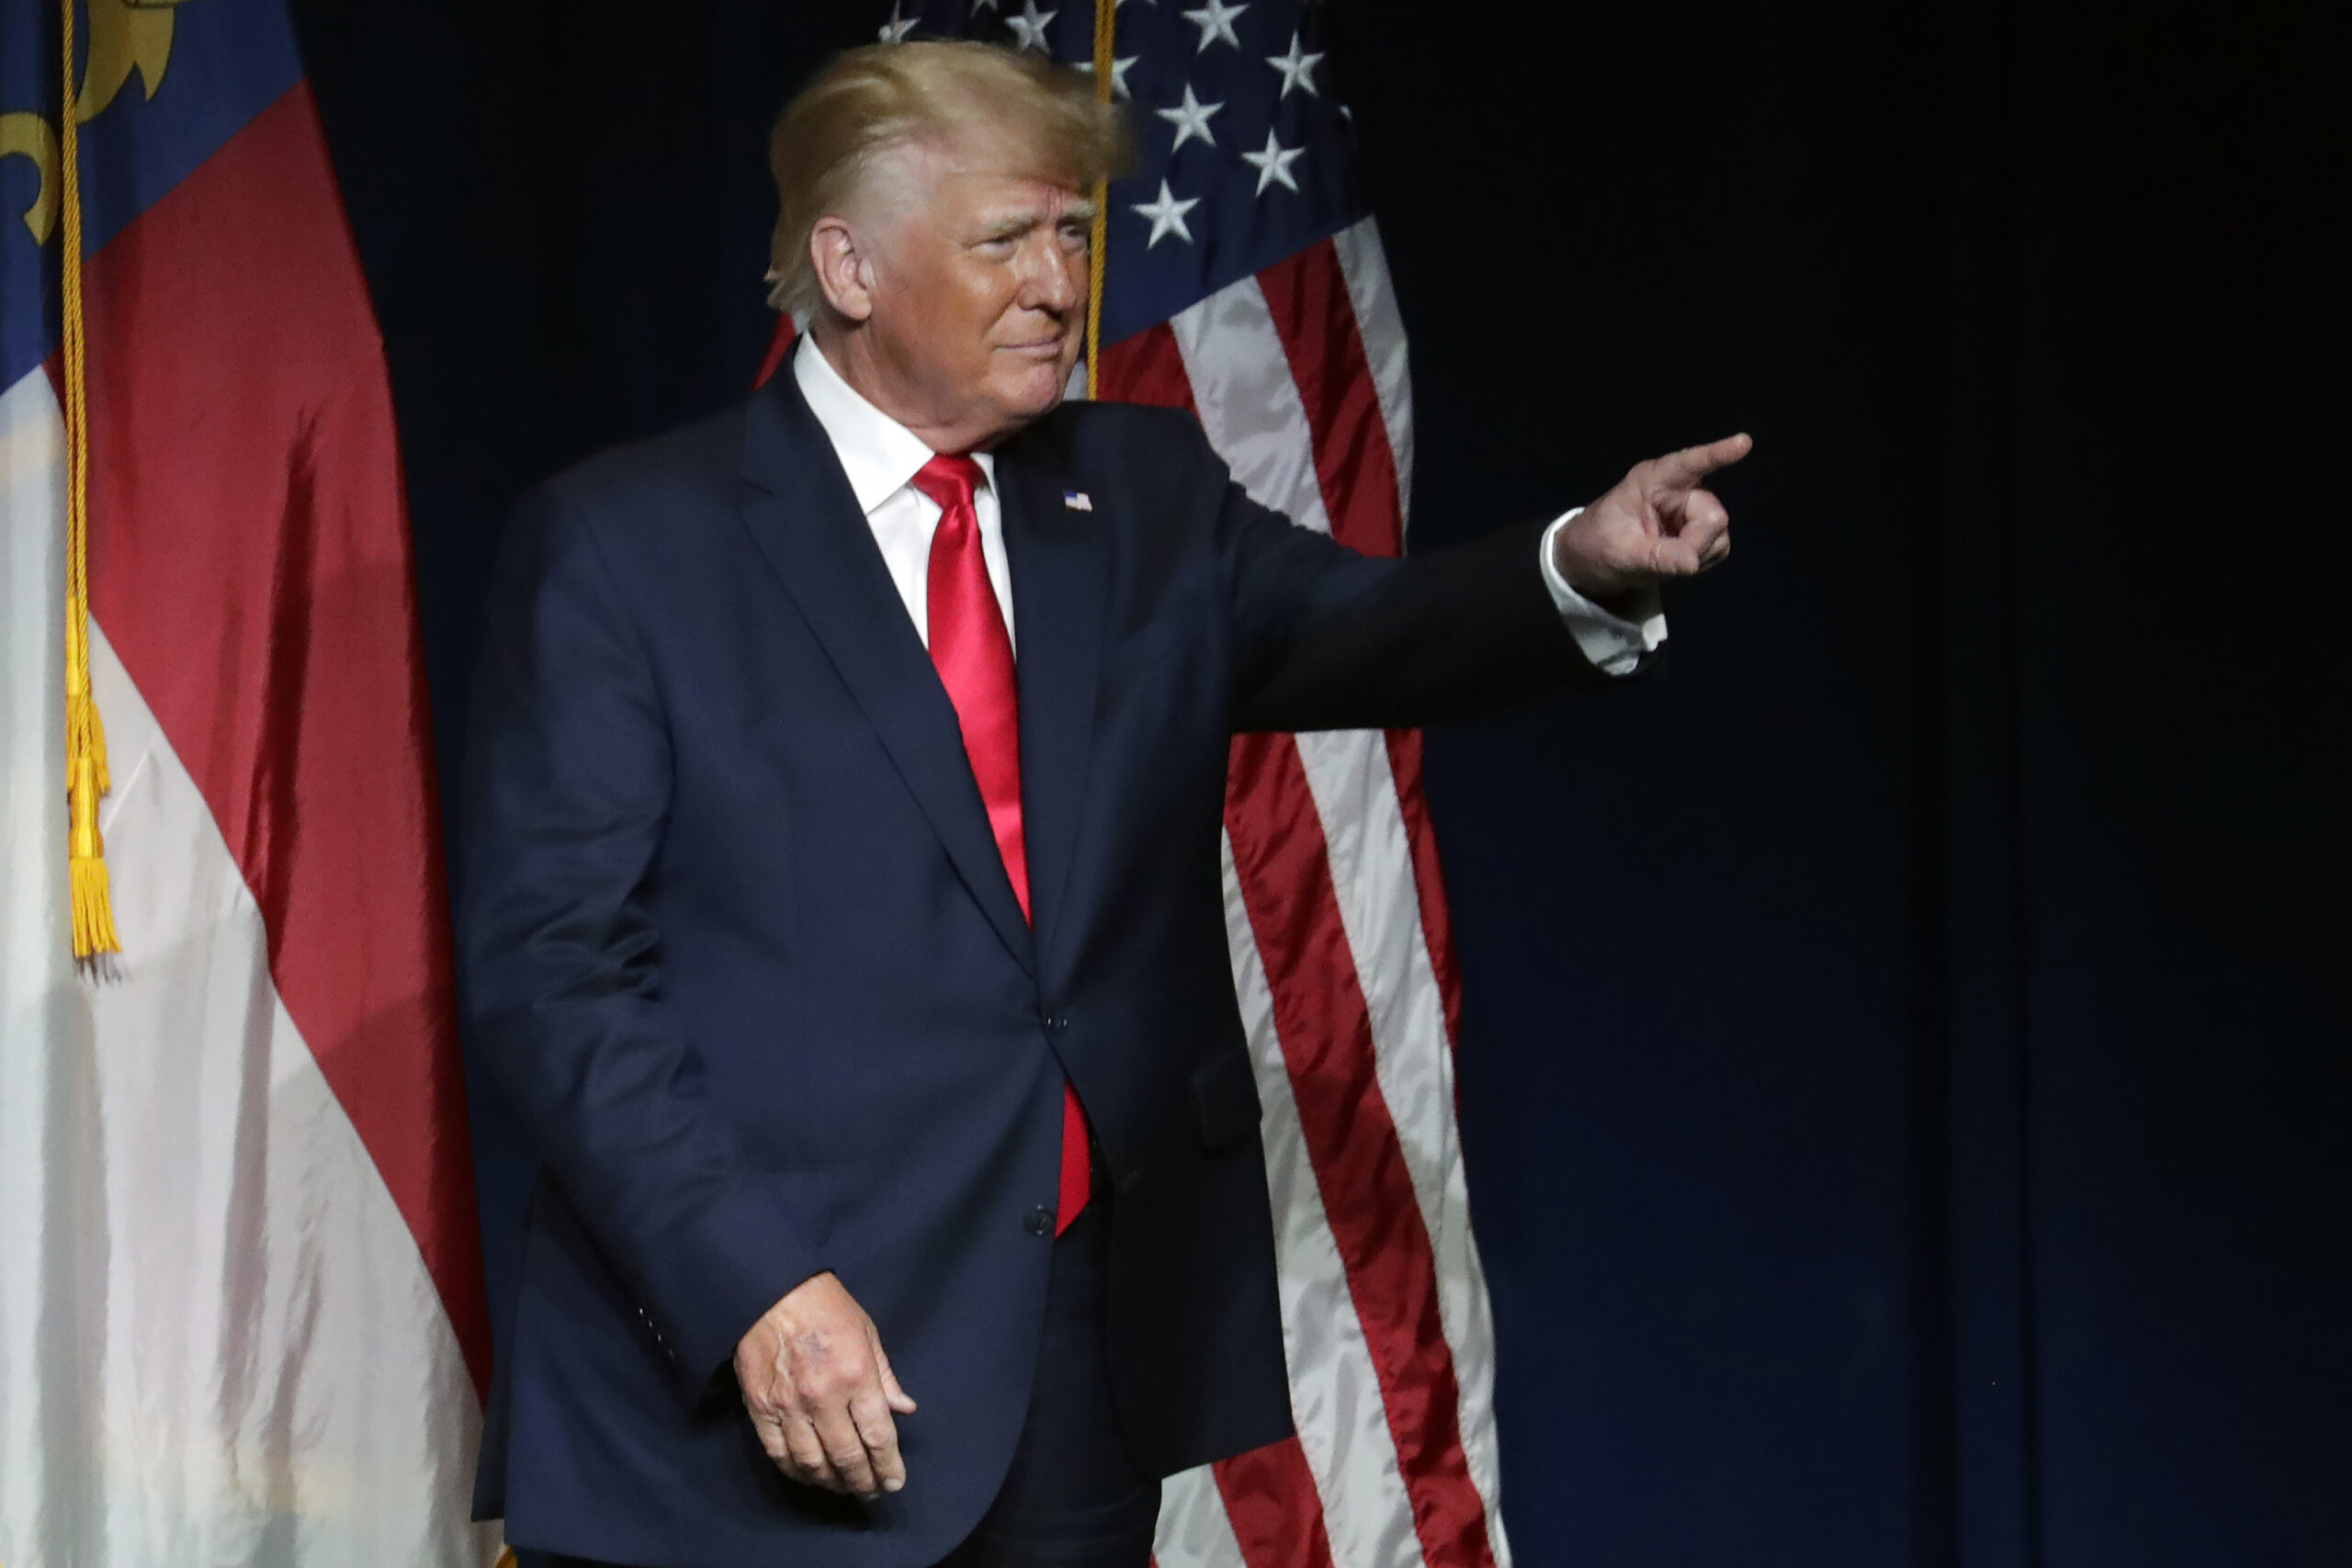 Former President Donald Trump acknowledges the crowd as he speaks at the North Carolina Republican Convention Saturday, June 5, 2021, in Greenville, N.C. (AP Photo/Chris Seward)